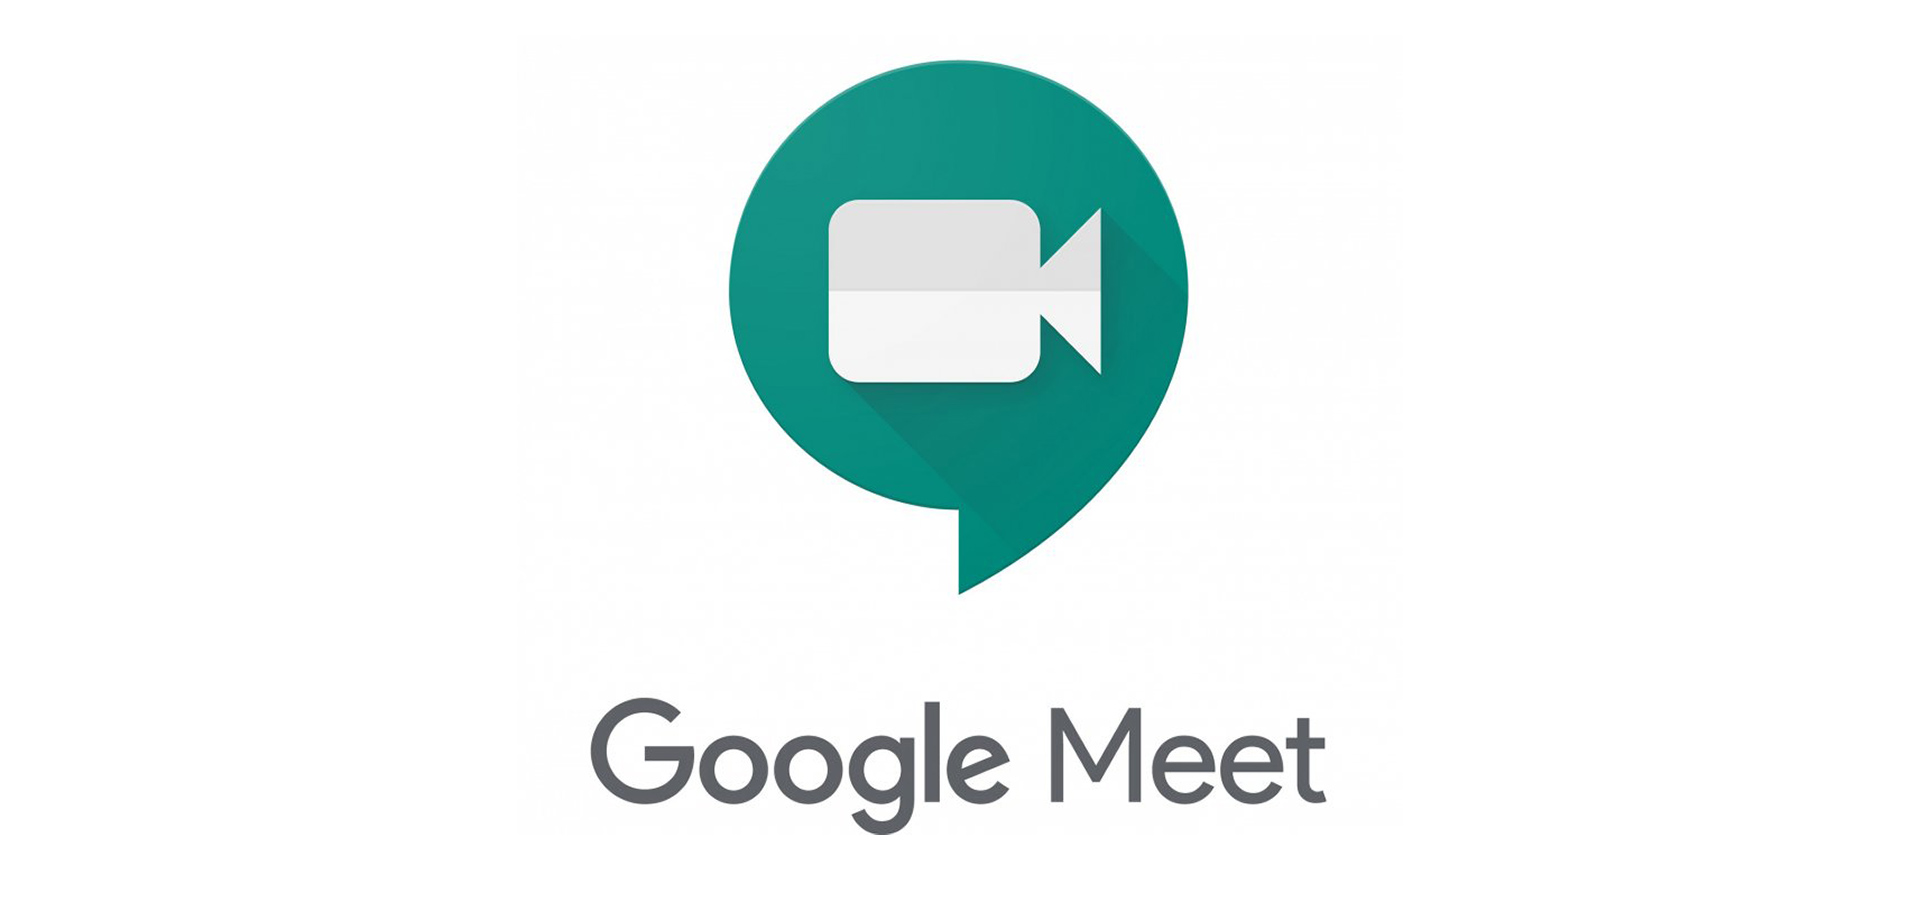 How to Set up a Google Meet Video Call - Dignited